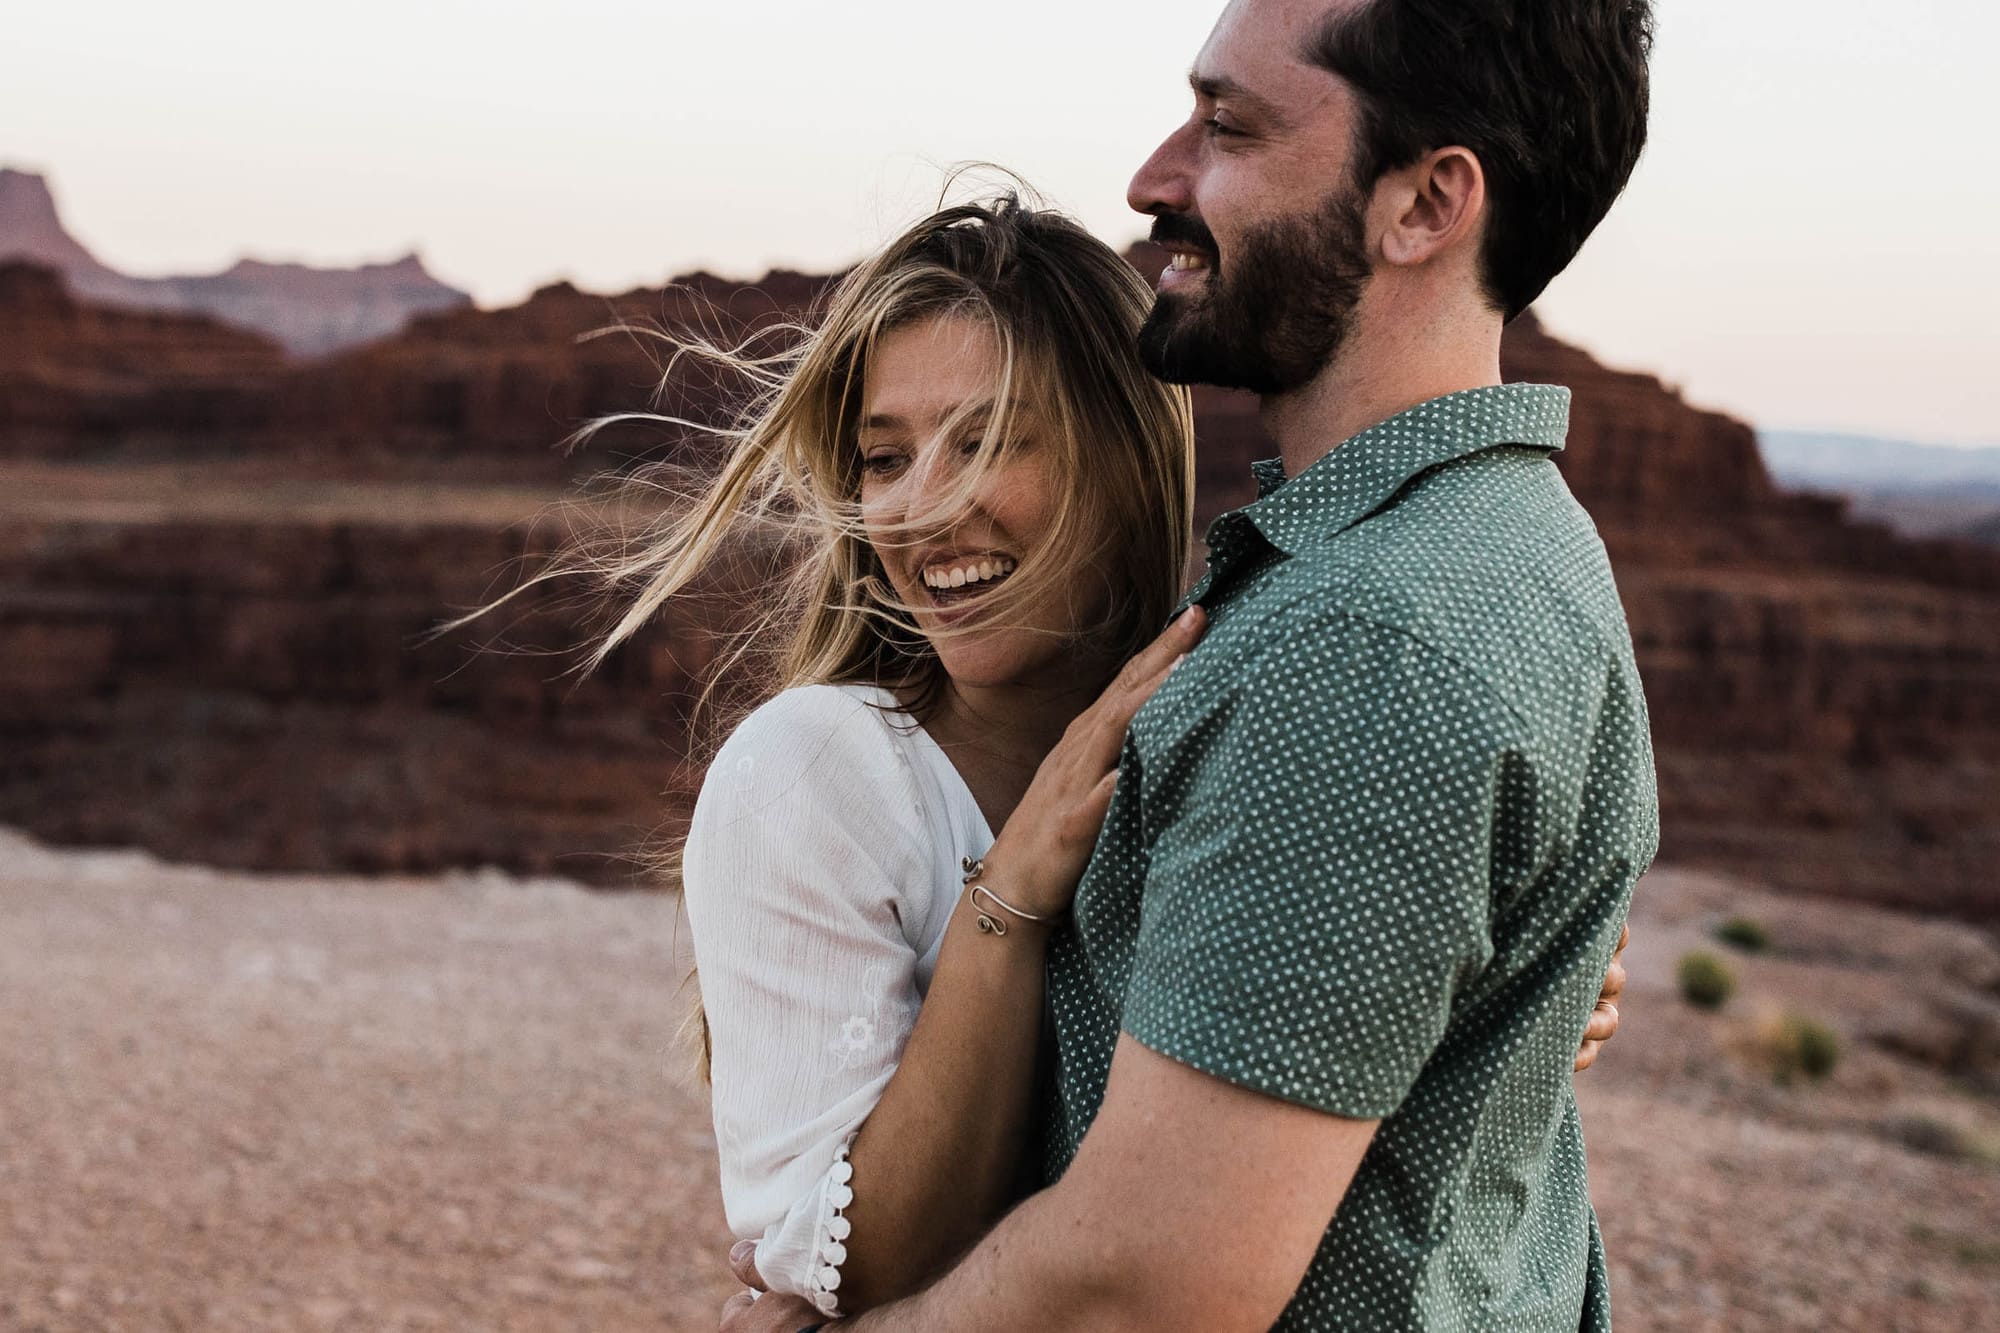 This Utah elopement was the perfect blend of adventure and intentional moments. This couple never did it for the gram- they did it for them. Check it out!